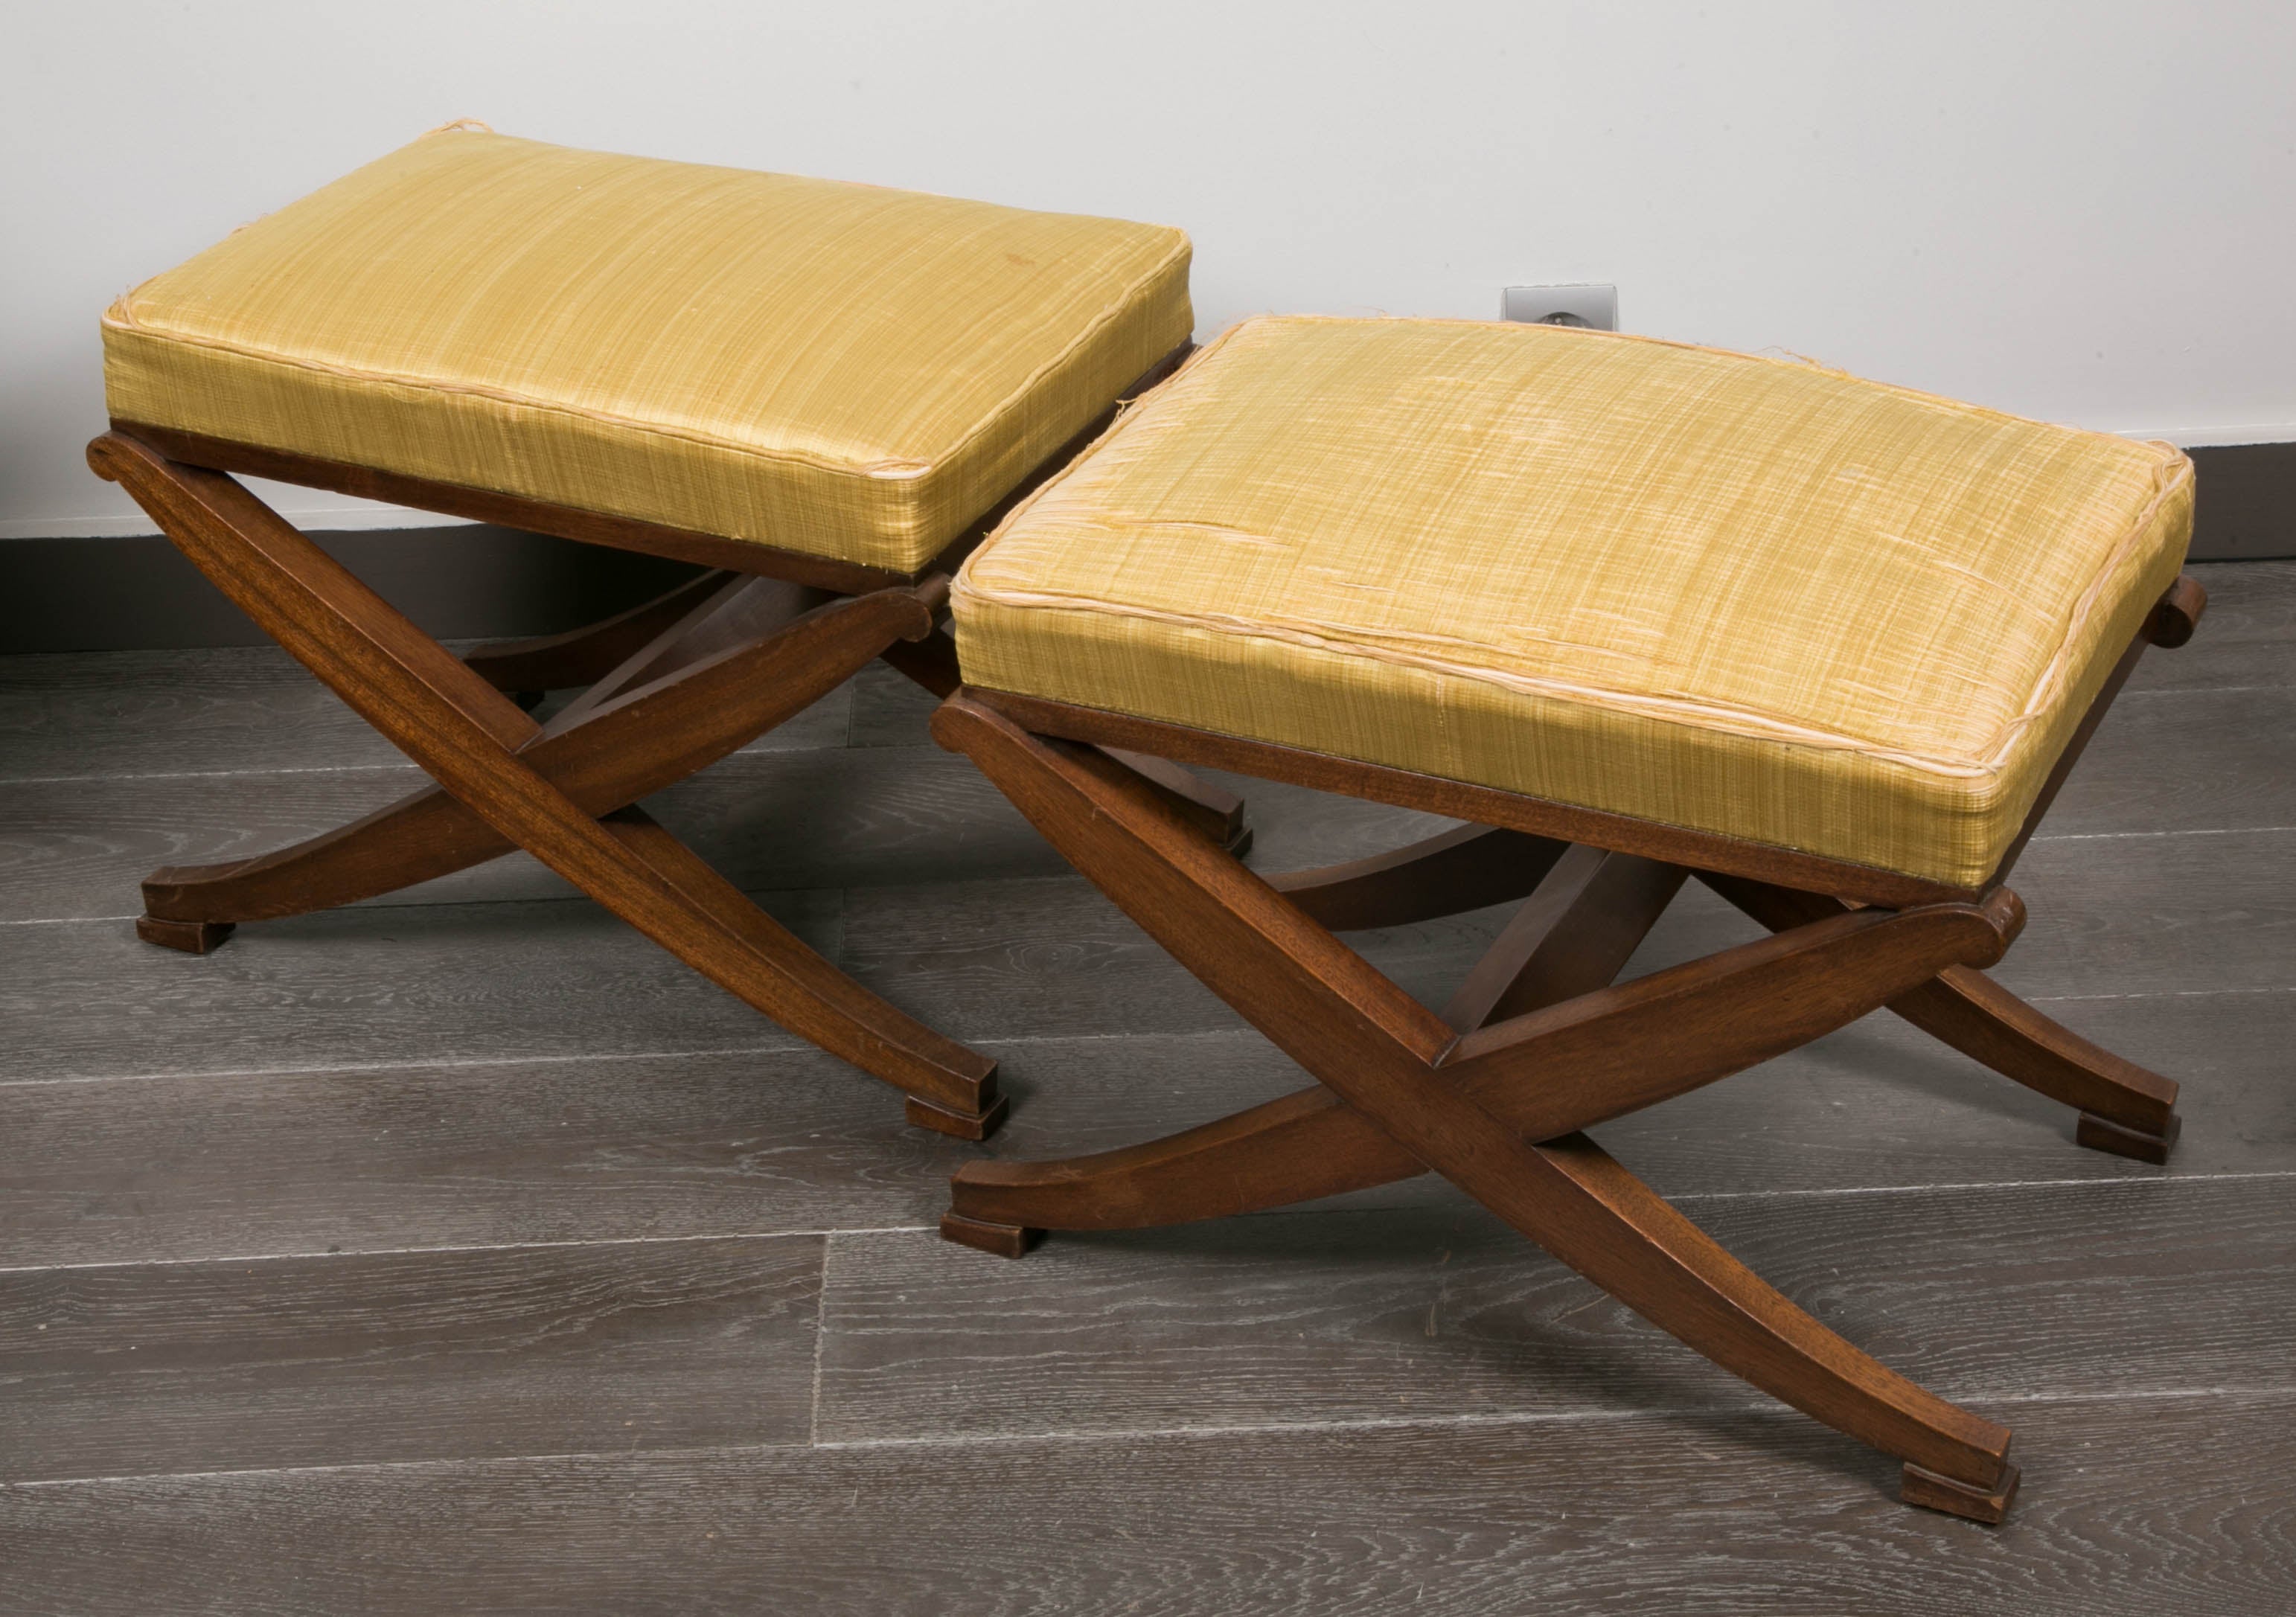 Elegant pair of stools, in original condition with wild yellow silk.
Base in rosewood, some wears.
By André Arbus.
Similar model in:
André Arbus by Yvonne Brunhammer page 367.
Collection Marcilhac, Sotheby's Mars 2014, lot 73 , one stool sold